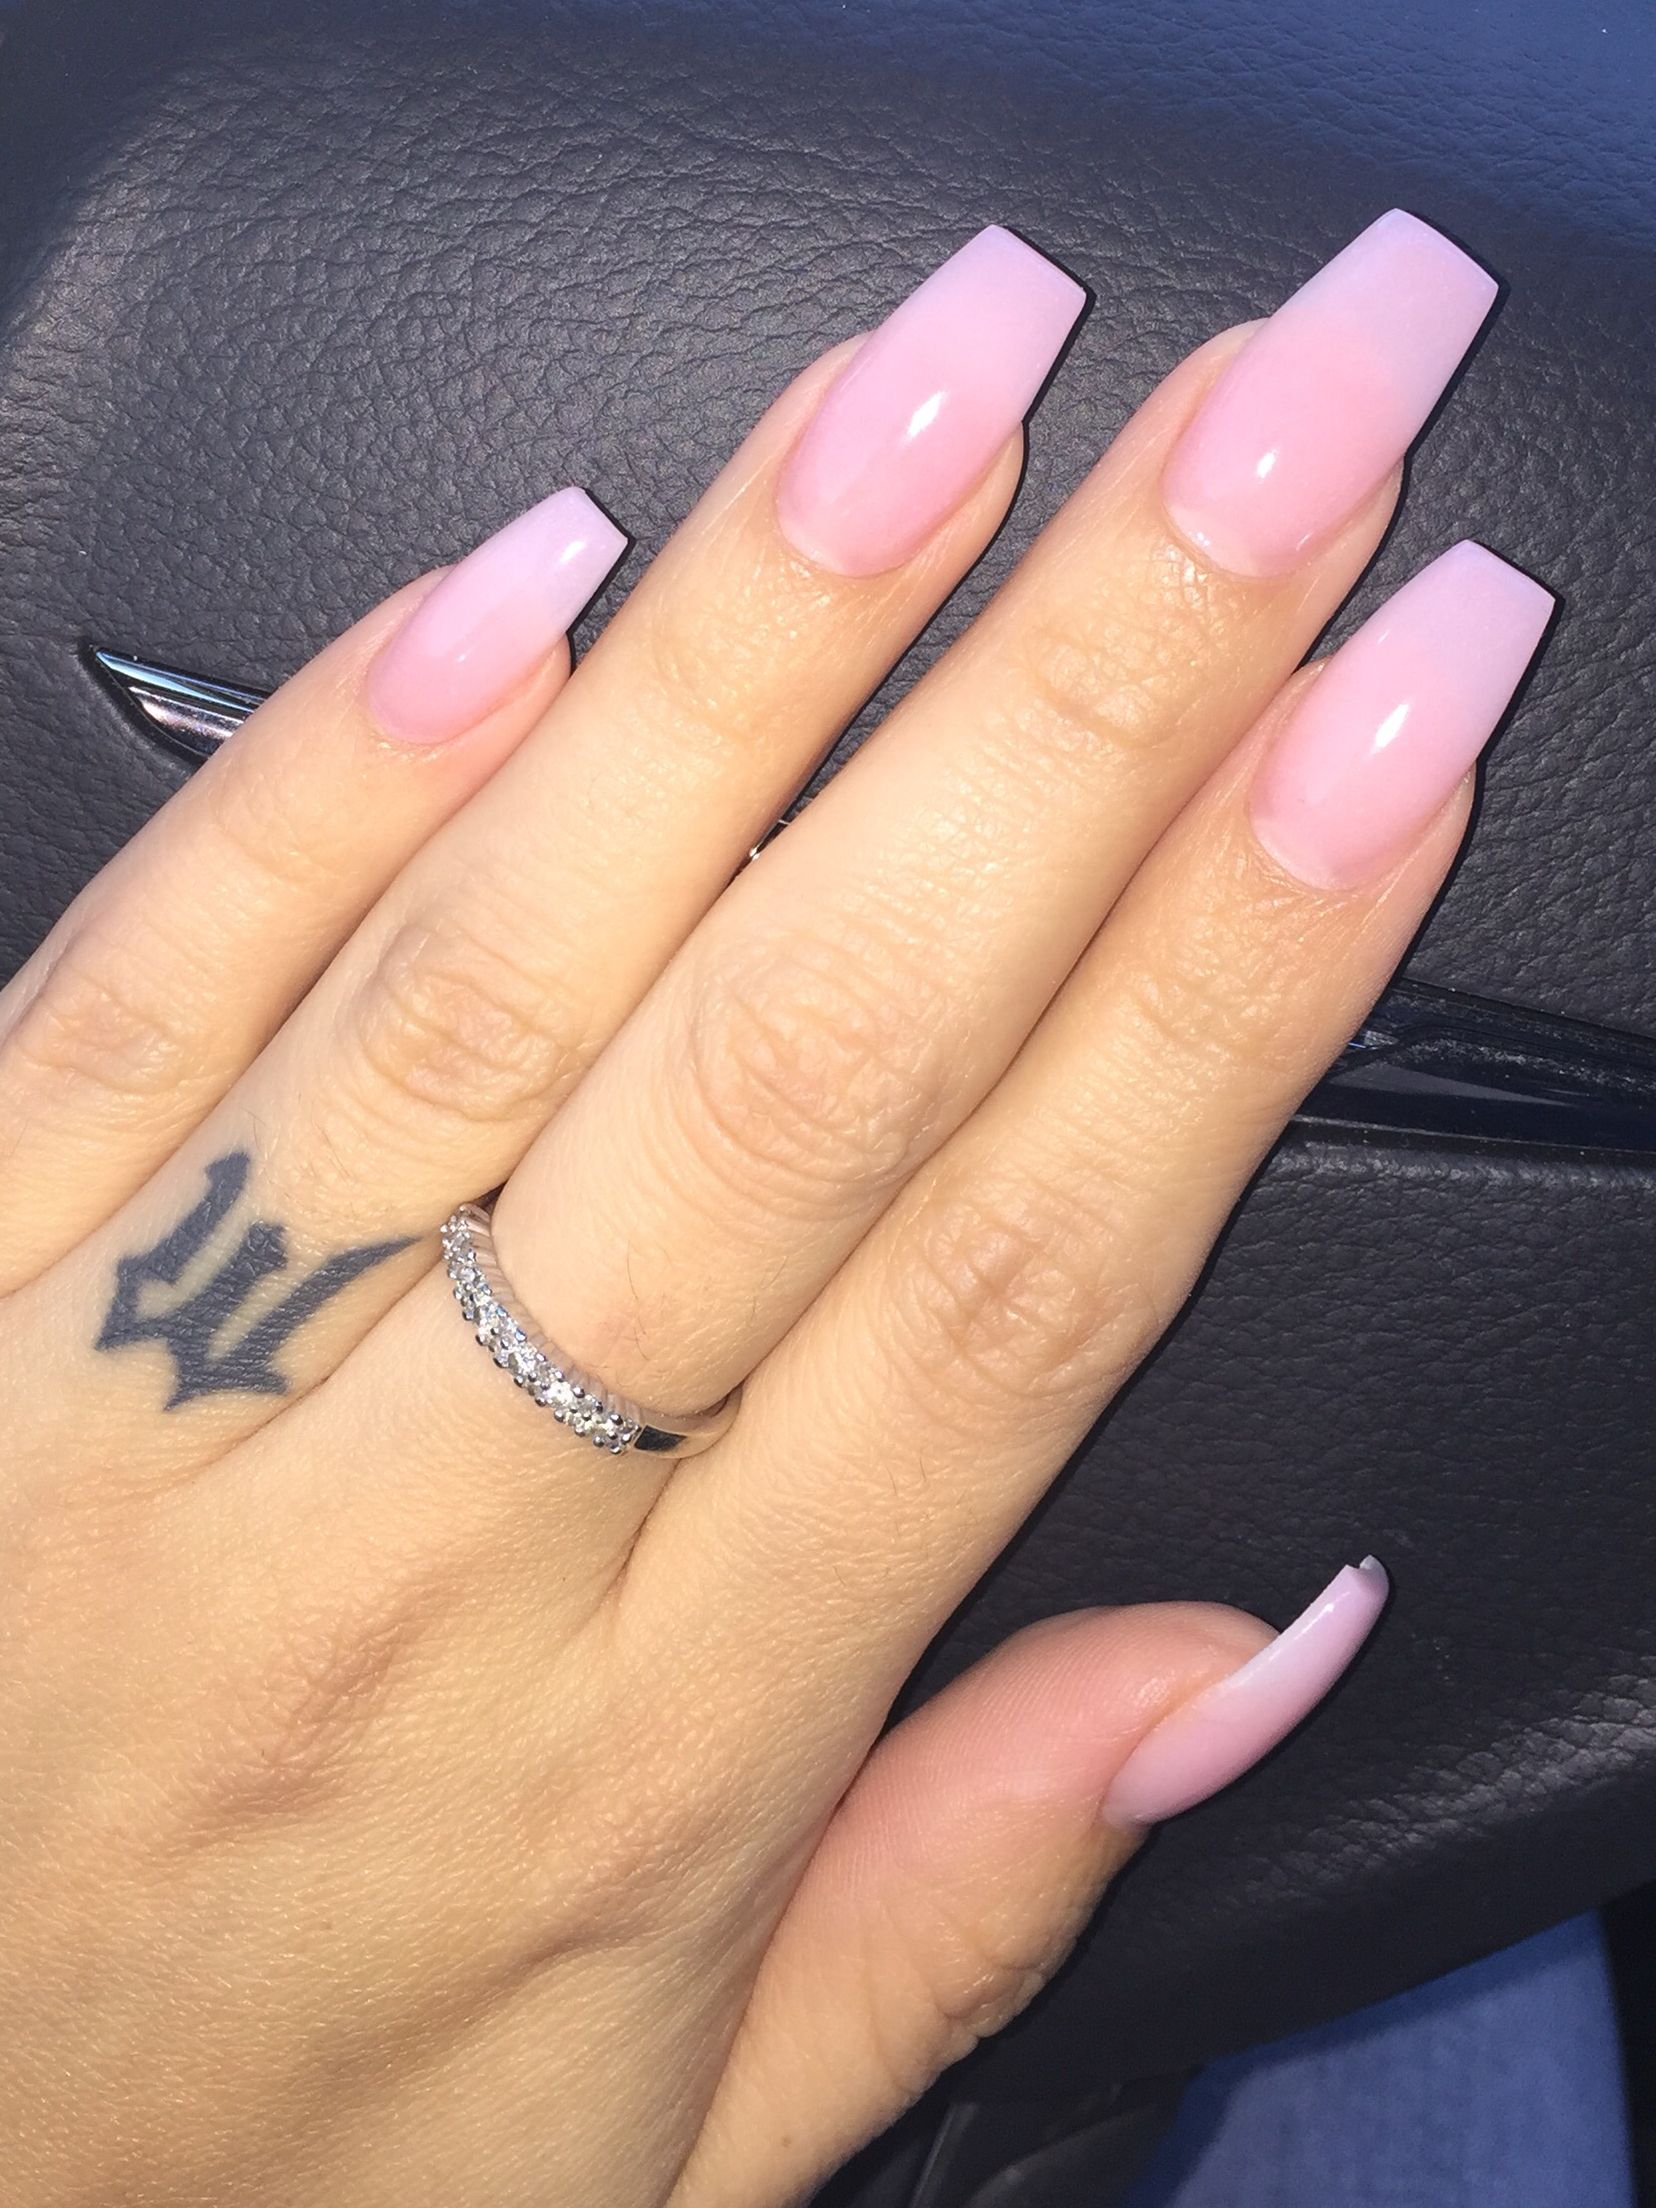 Ig: Ashleyvictoria.xo Pink Powder Acrylic With Clear Gelish Instagra concernant Ongle Rose Pastel fascinant 